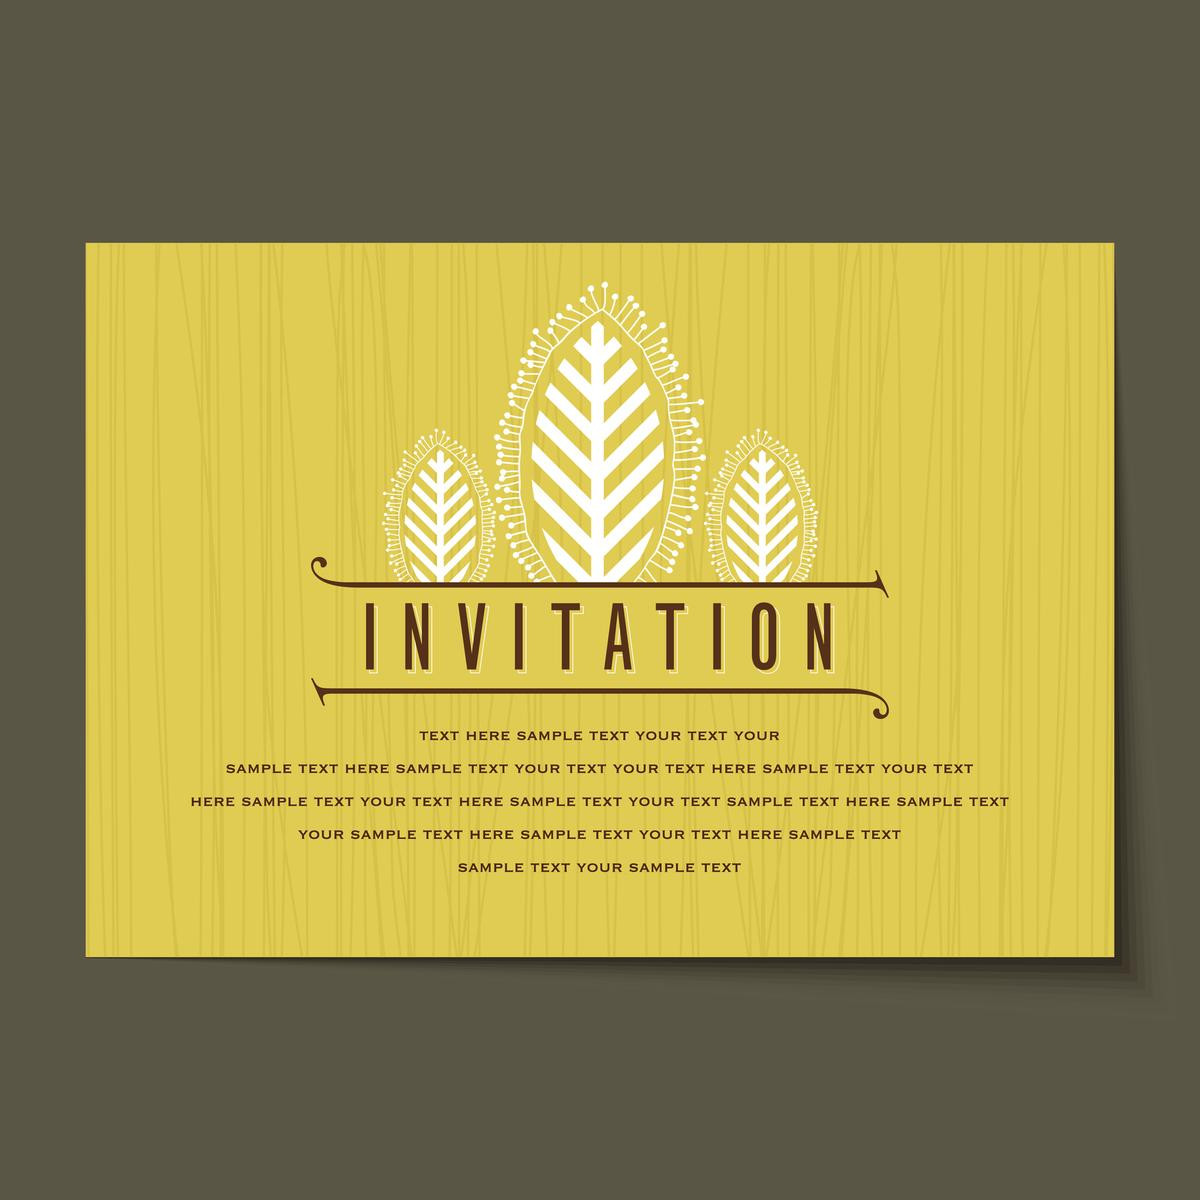 Birthday Invitation Message
 Falling Short of Perfect Party Invitation Wordings Here